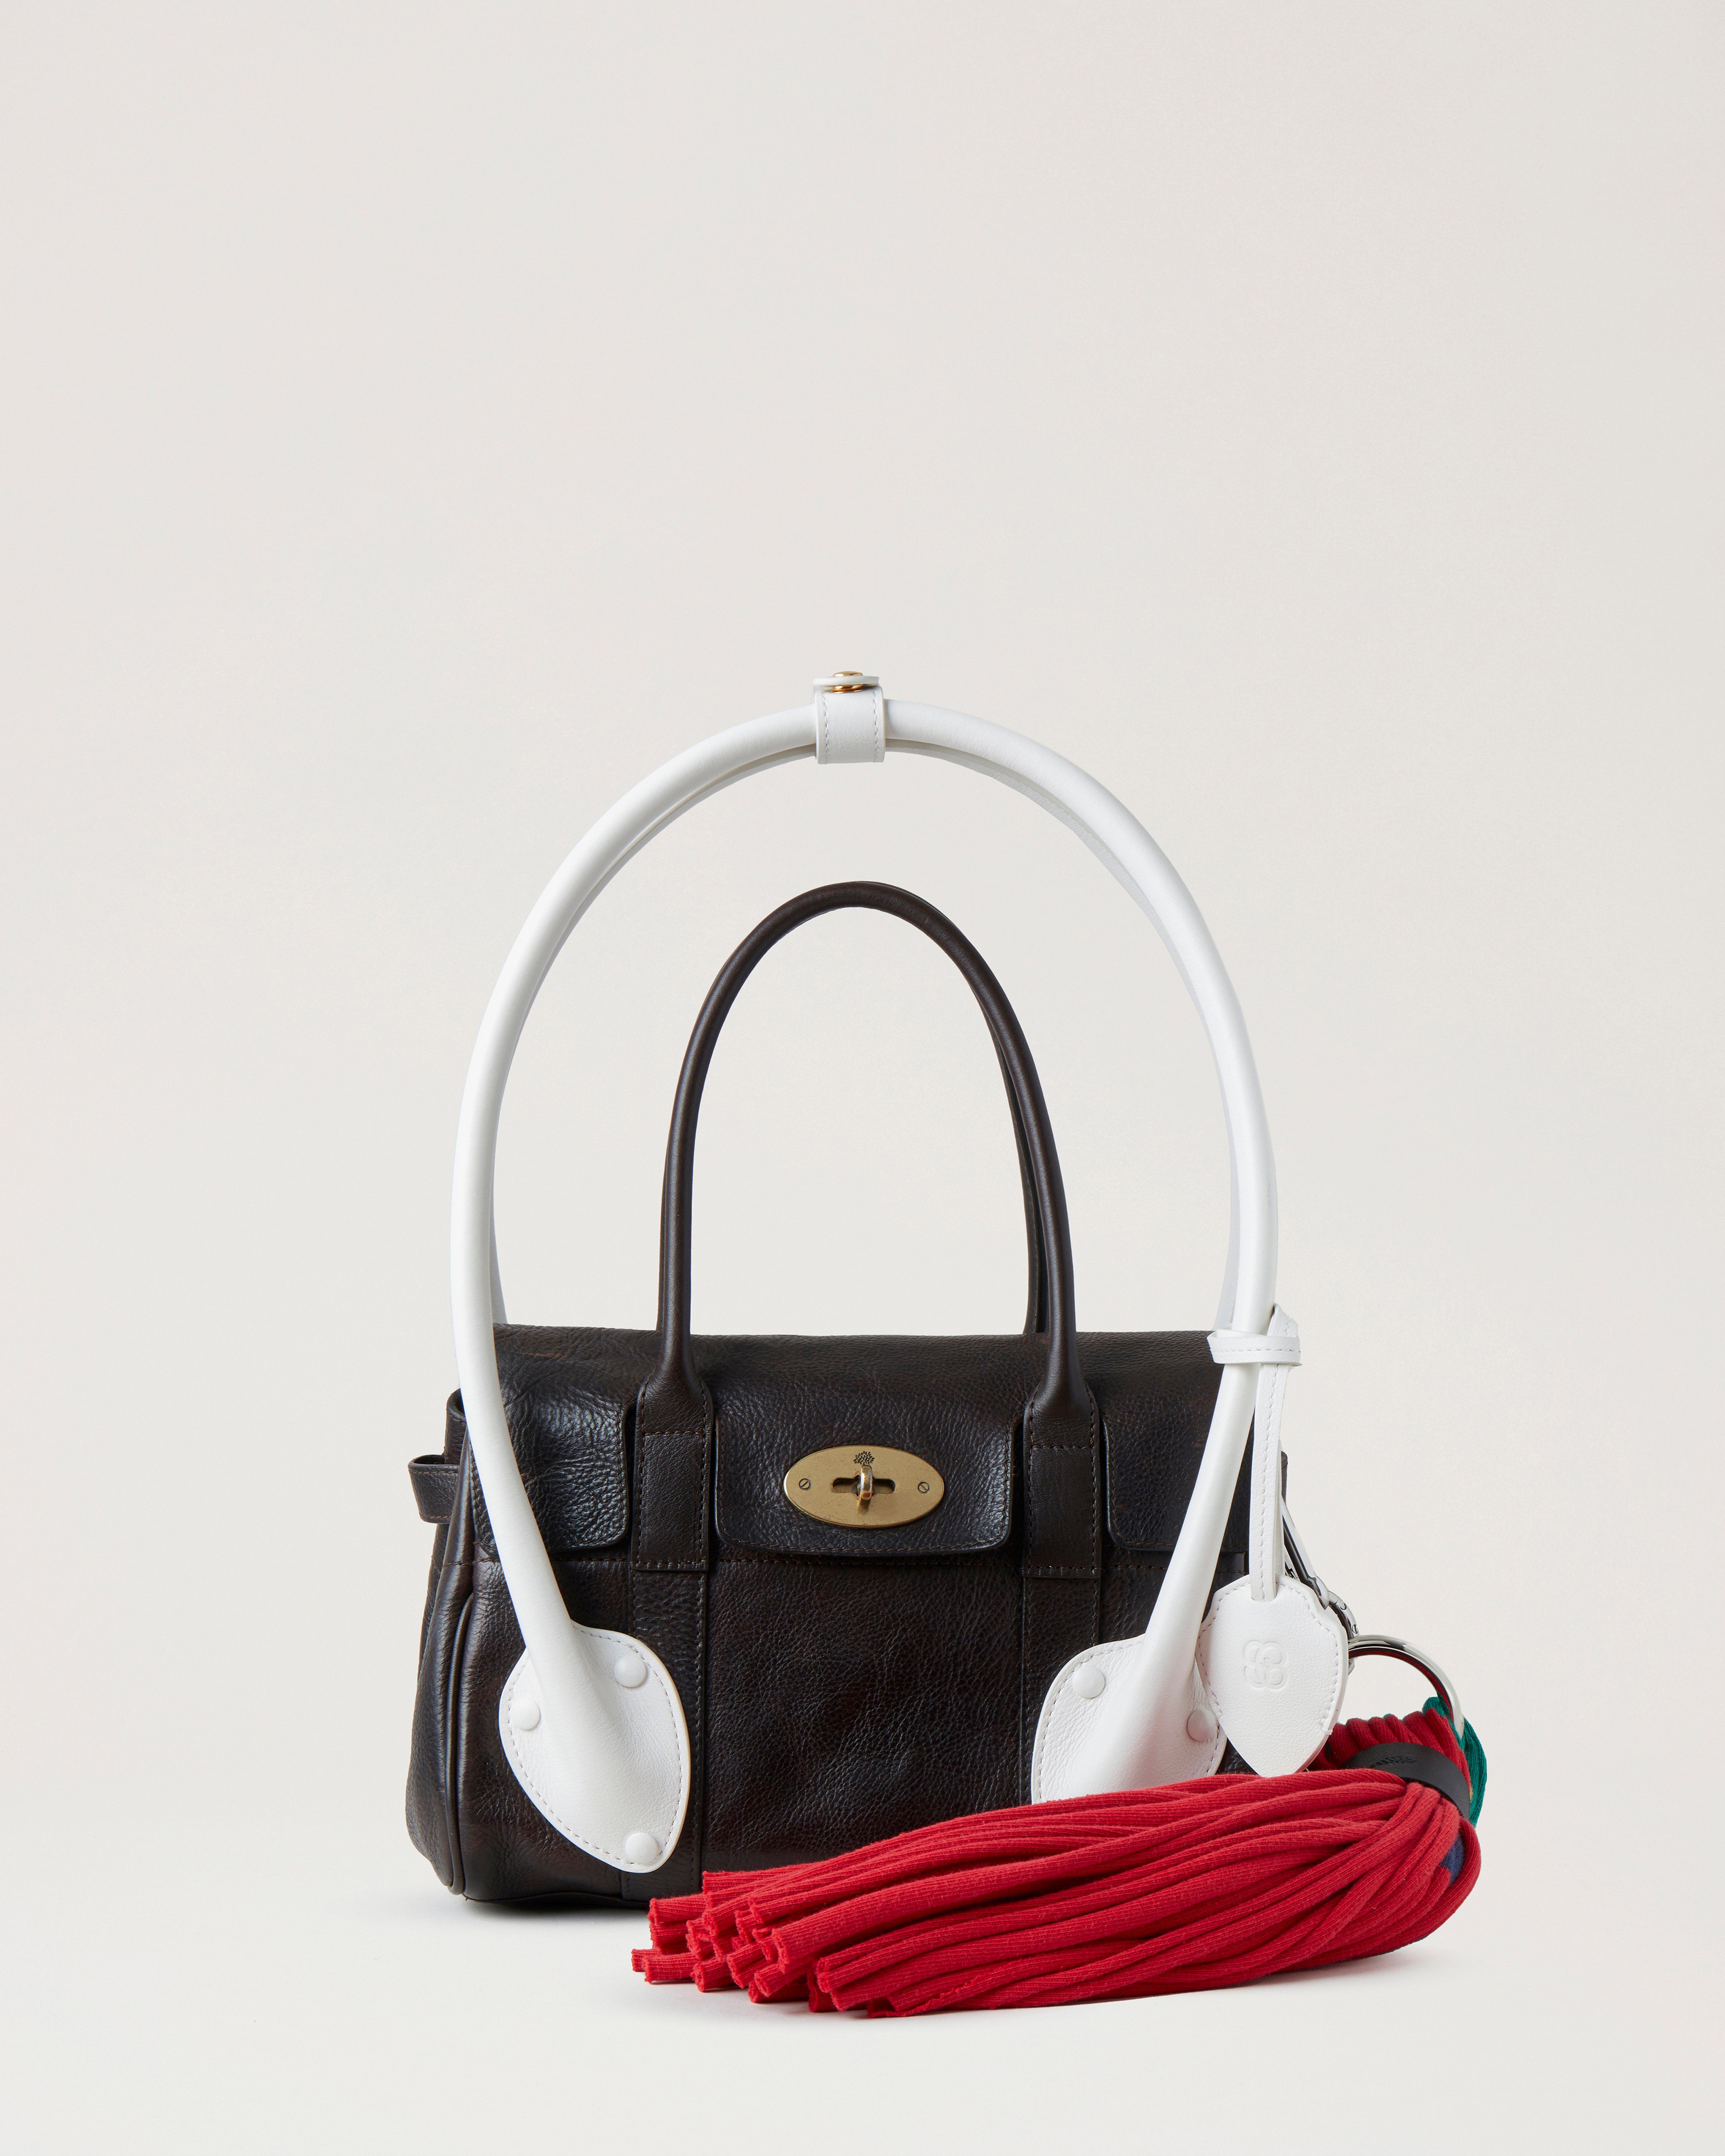 Bayswater Swing 02 Handbag in Chocolate Leather from the Mulberry x Stefan Cooke collection